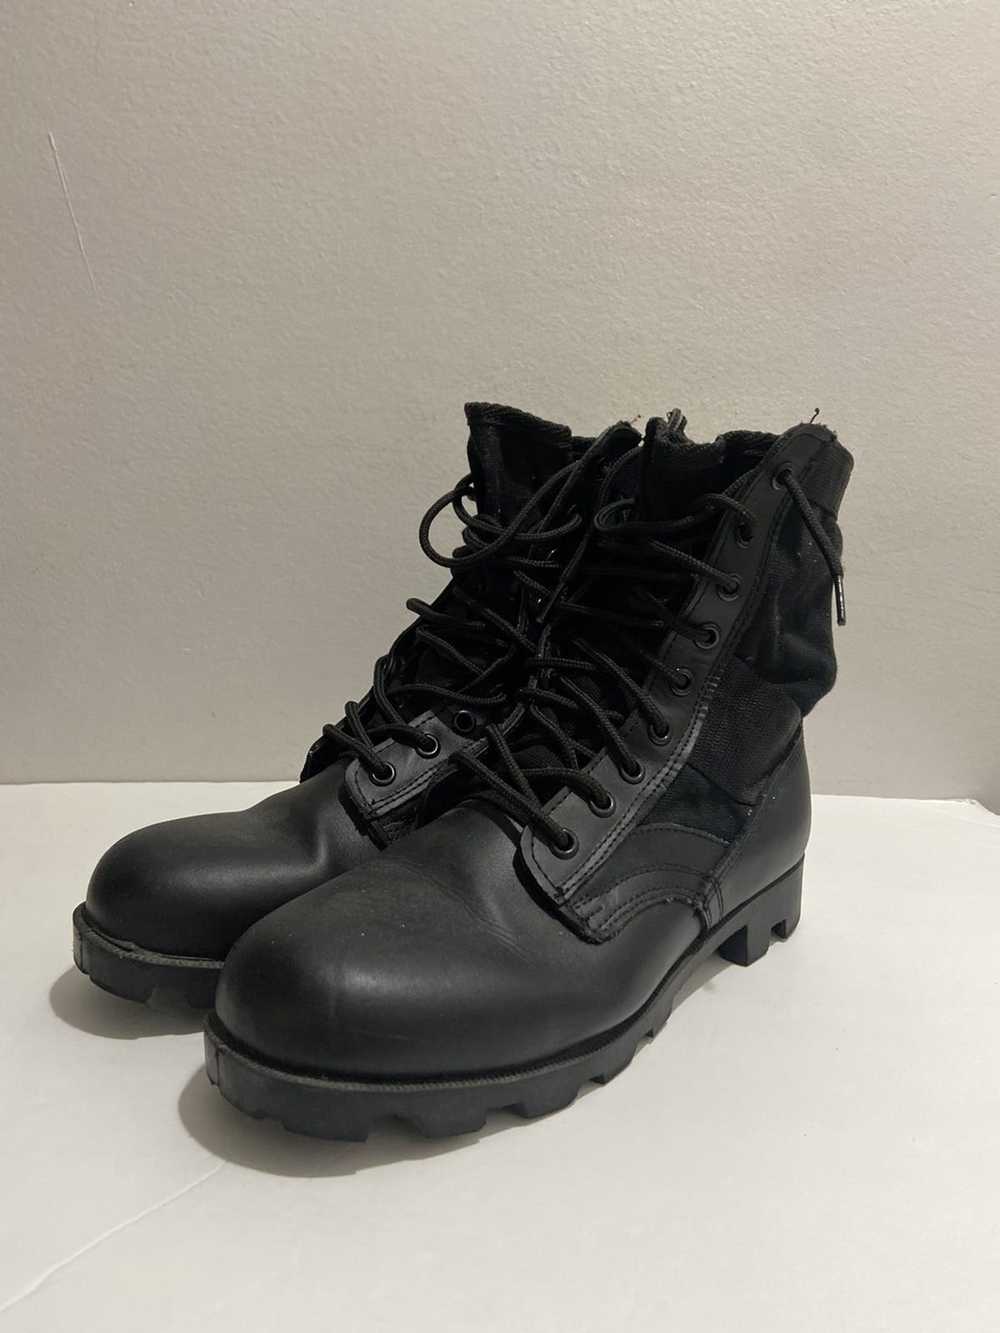 Japanese Brand × Streetwear × Vintage Army boots - image 1